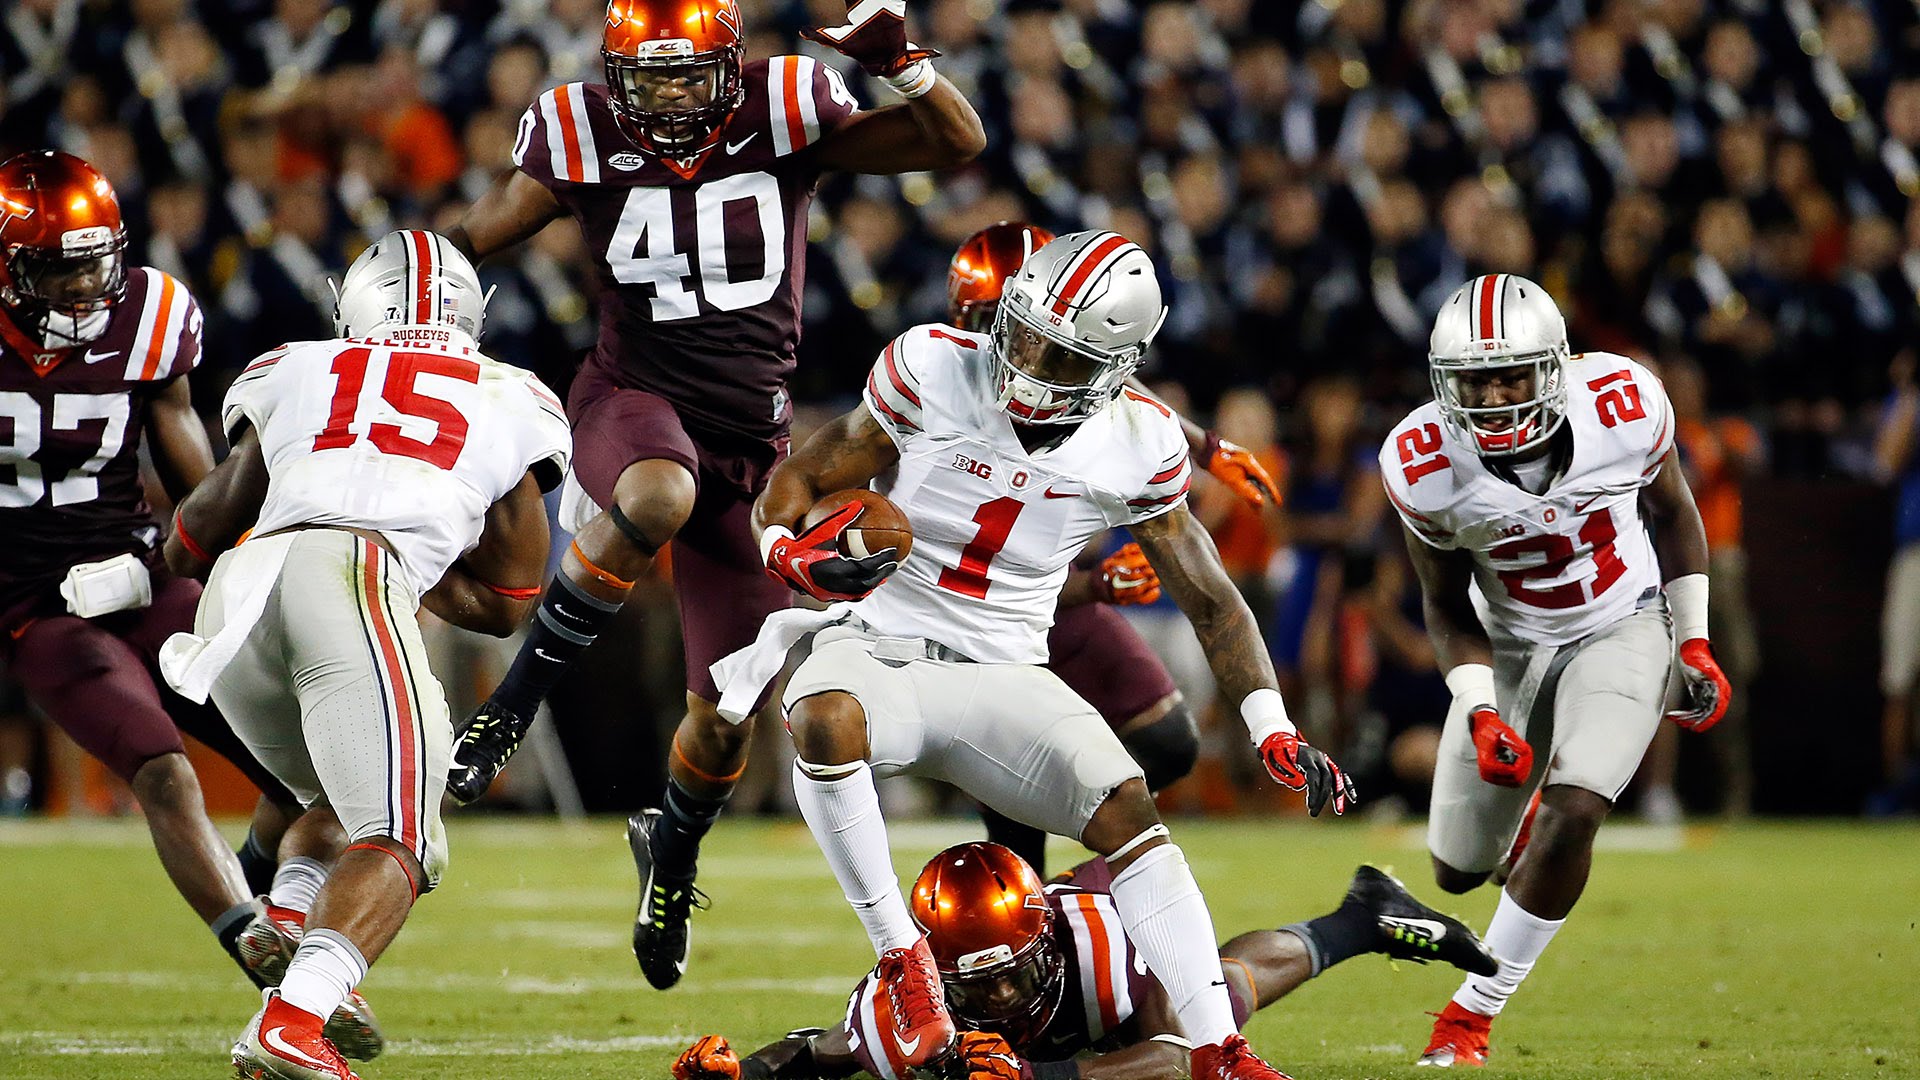 Ohio State WR Braxton Miller with an incredible spin move touchdown